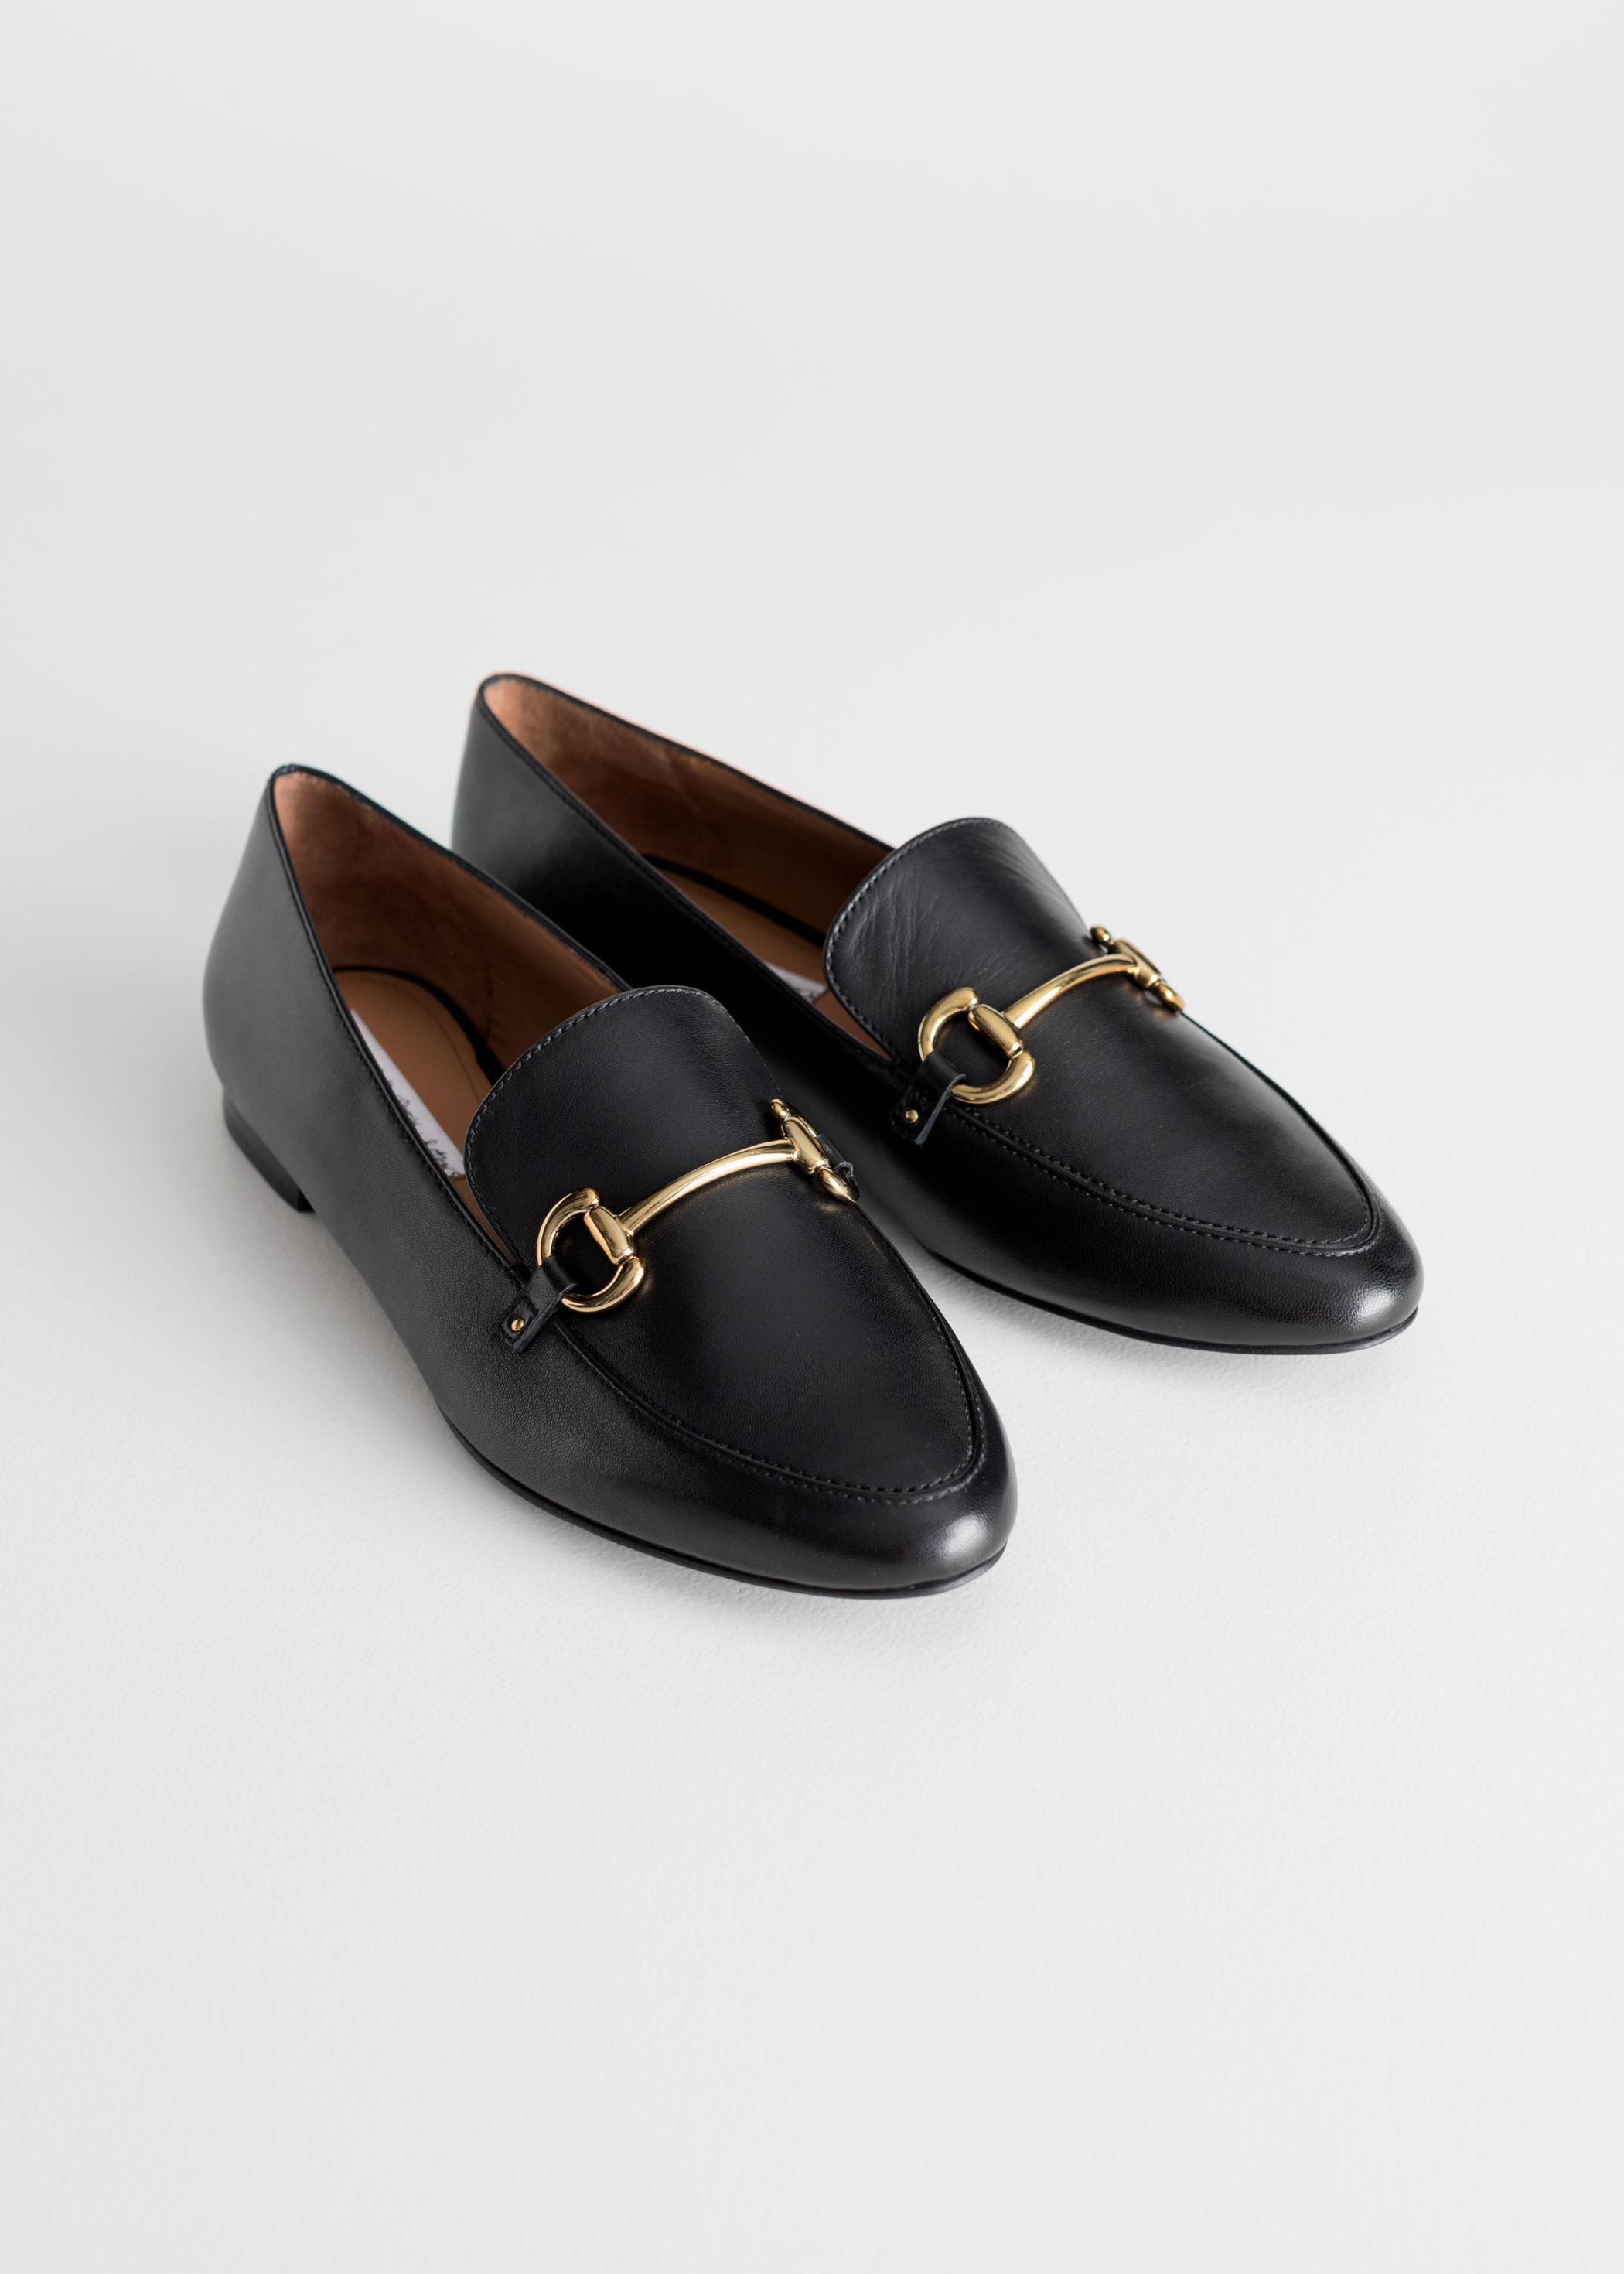 & Other Stories Equestrian Buckle Loafers